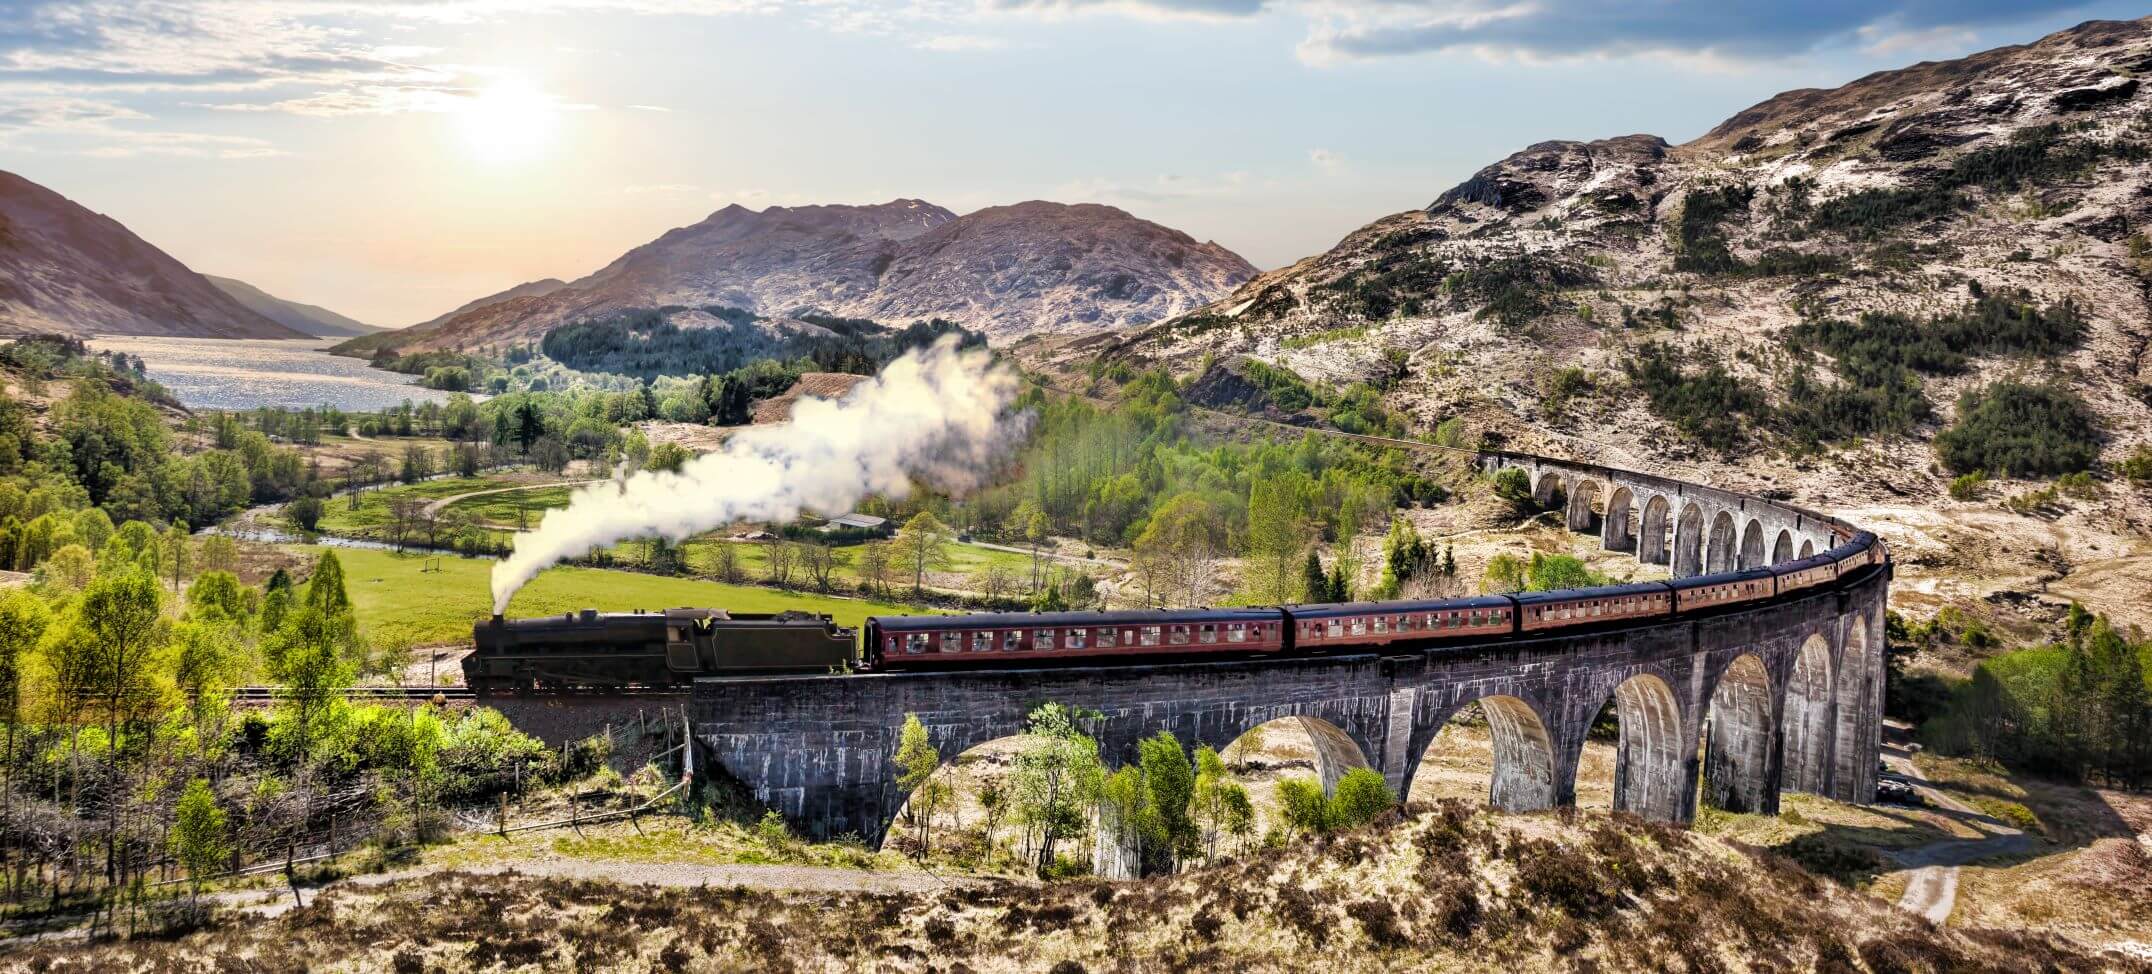 Glenfinnan Railway Viaduct in Scotland with the Jacobite steam train